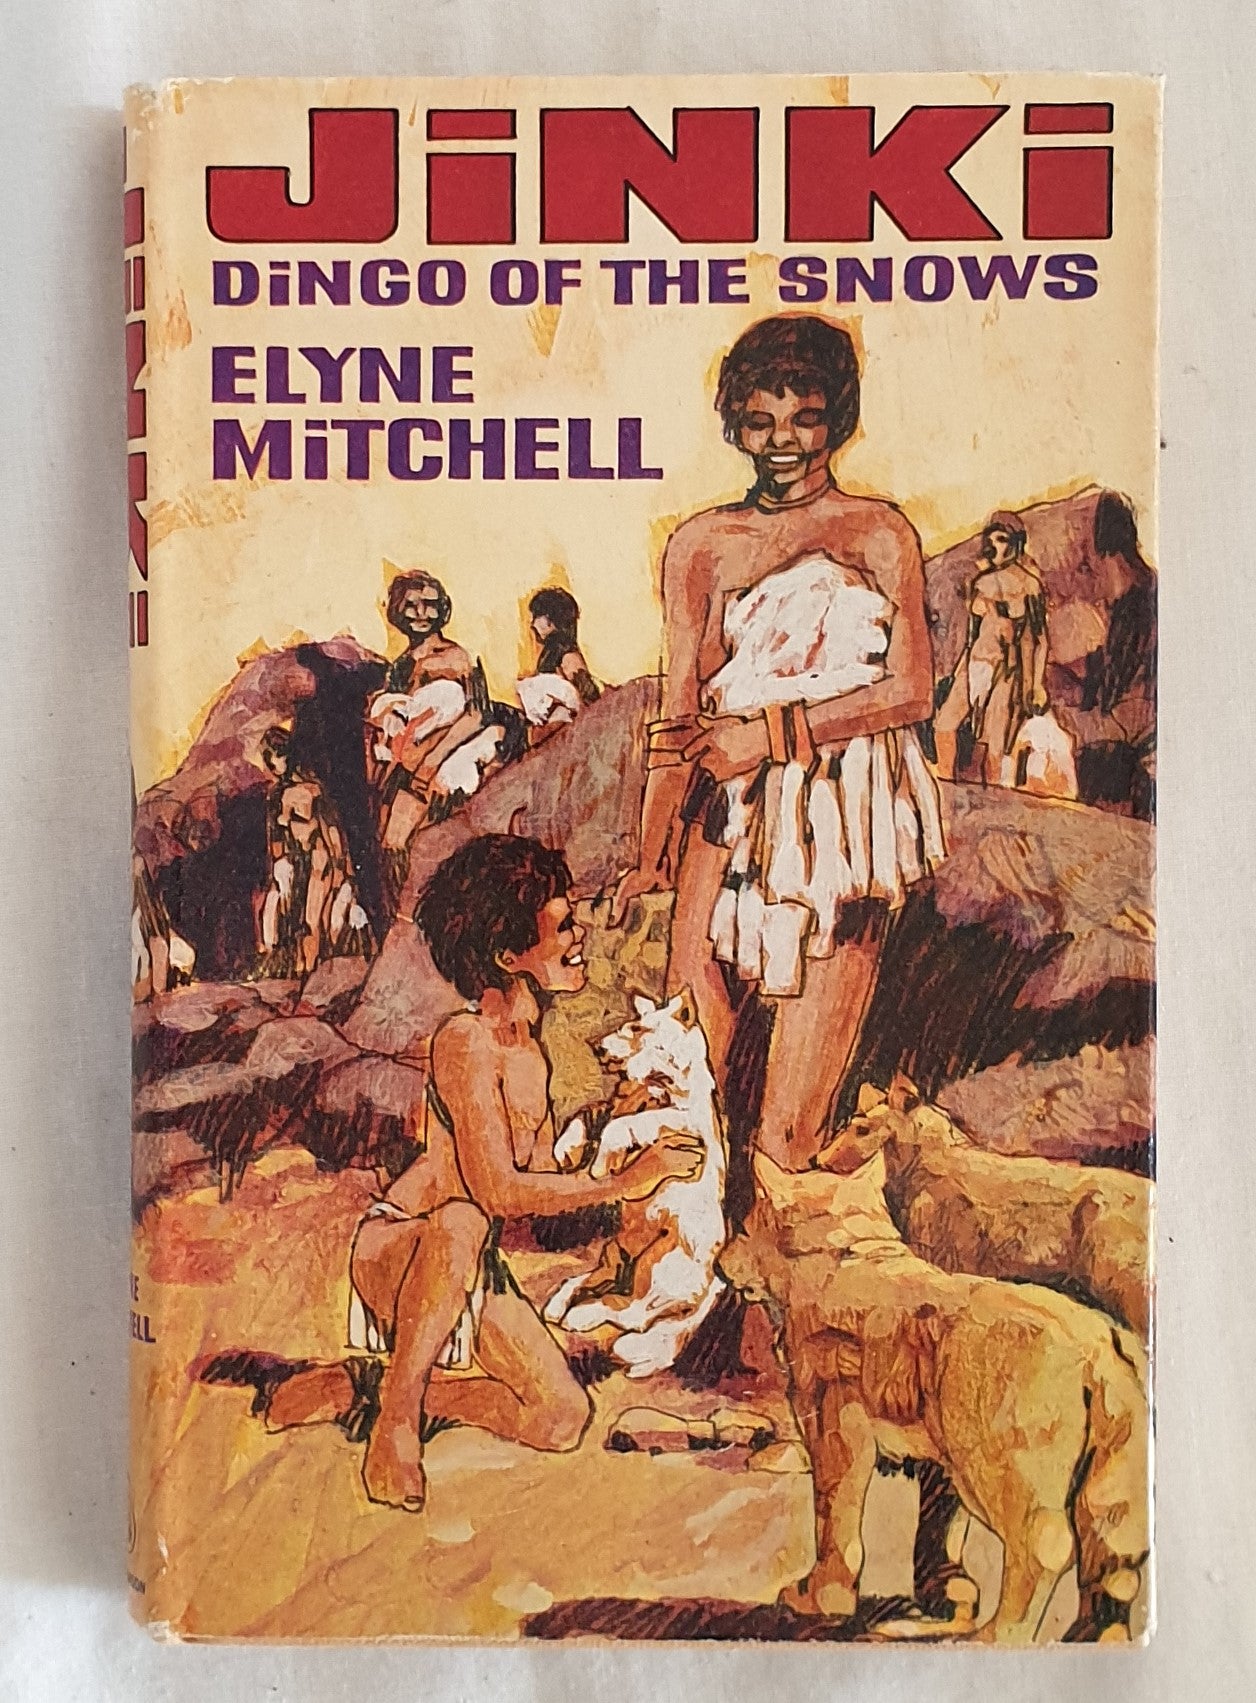 Jinki  Dingo of the Snows  by Elyne Mitchell  Illustrated by Michael Cole